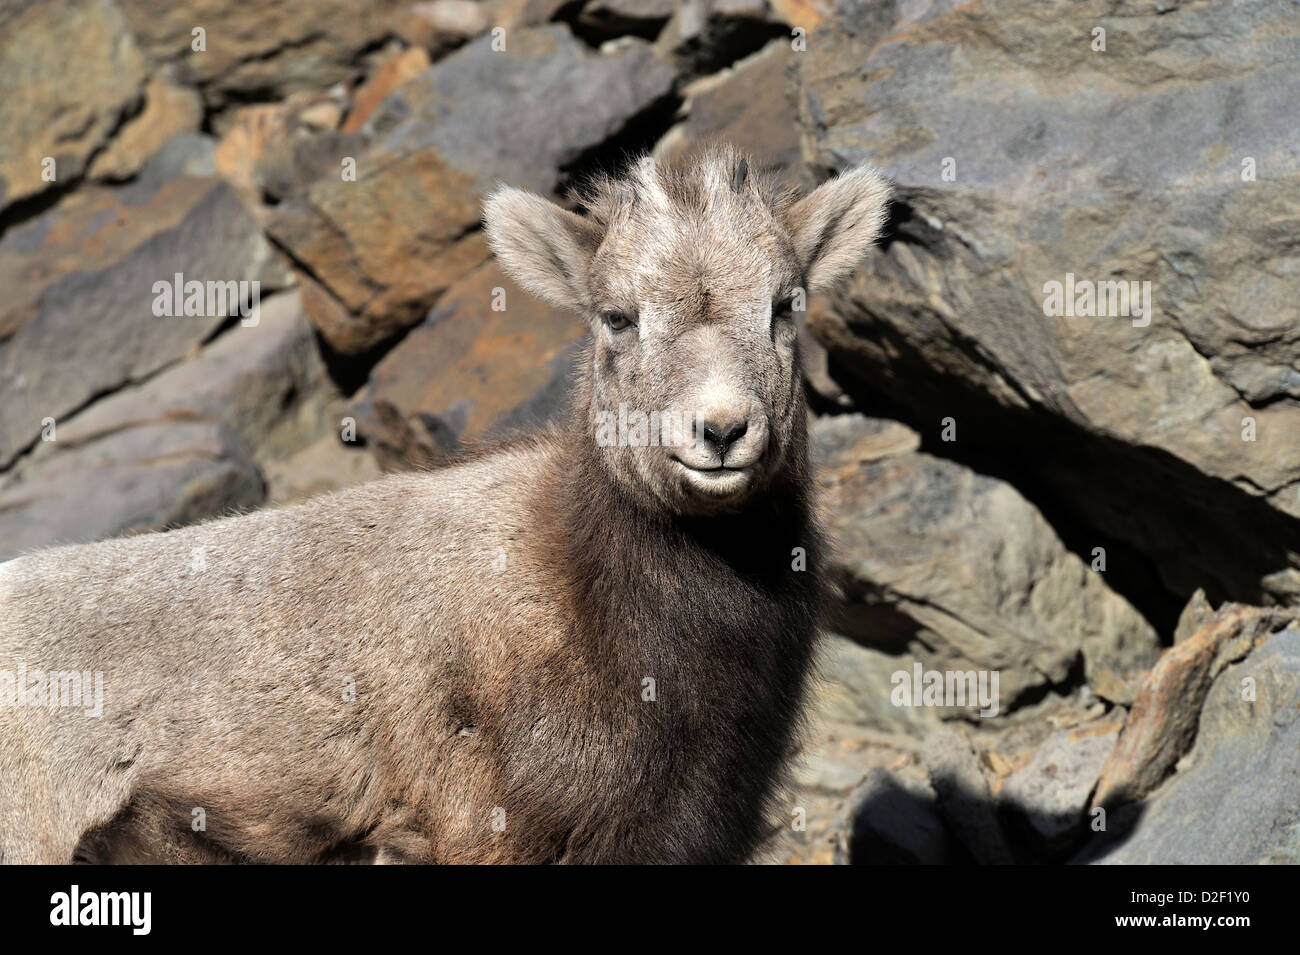 A portrait of a young bighorn sheep standing against a rock ledge Stock Photo